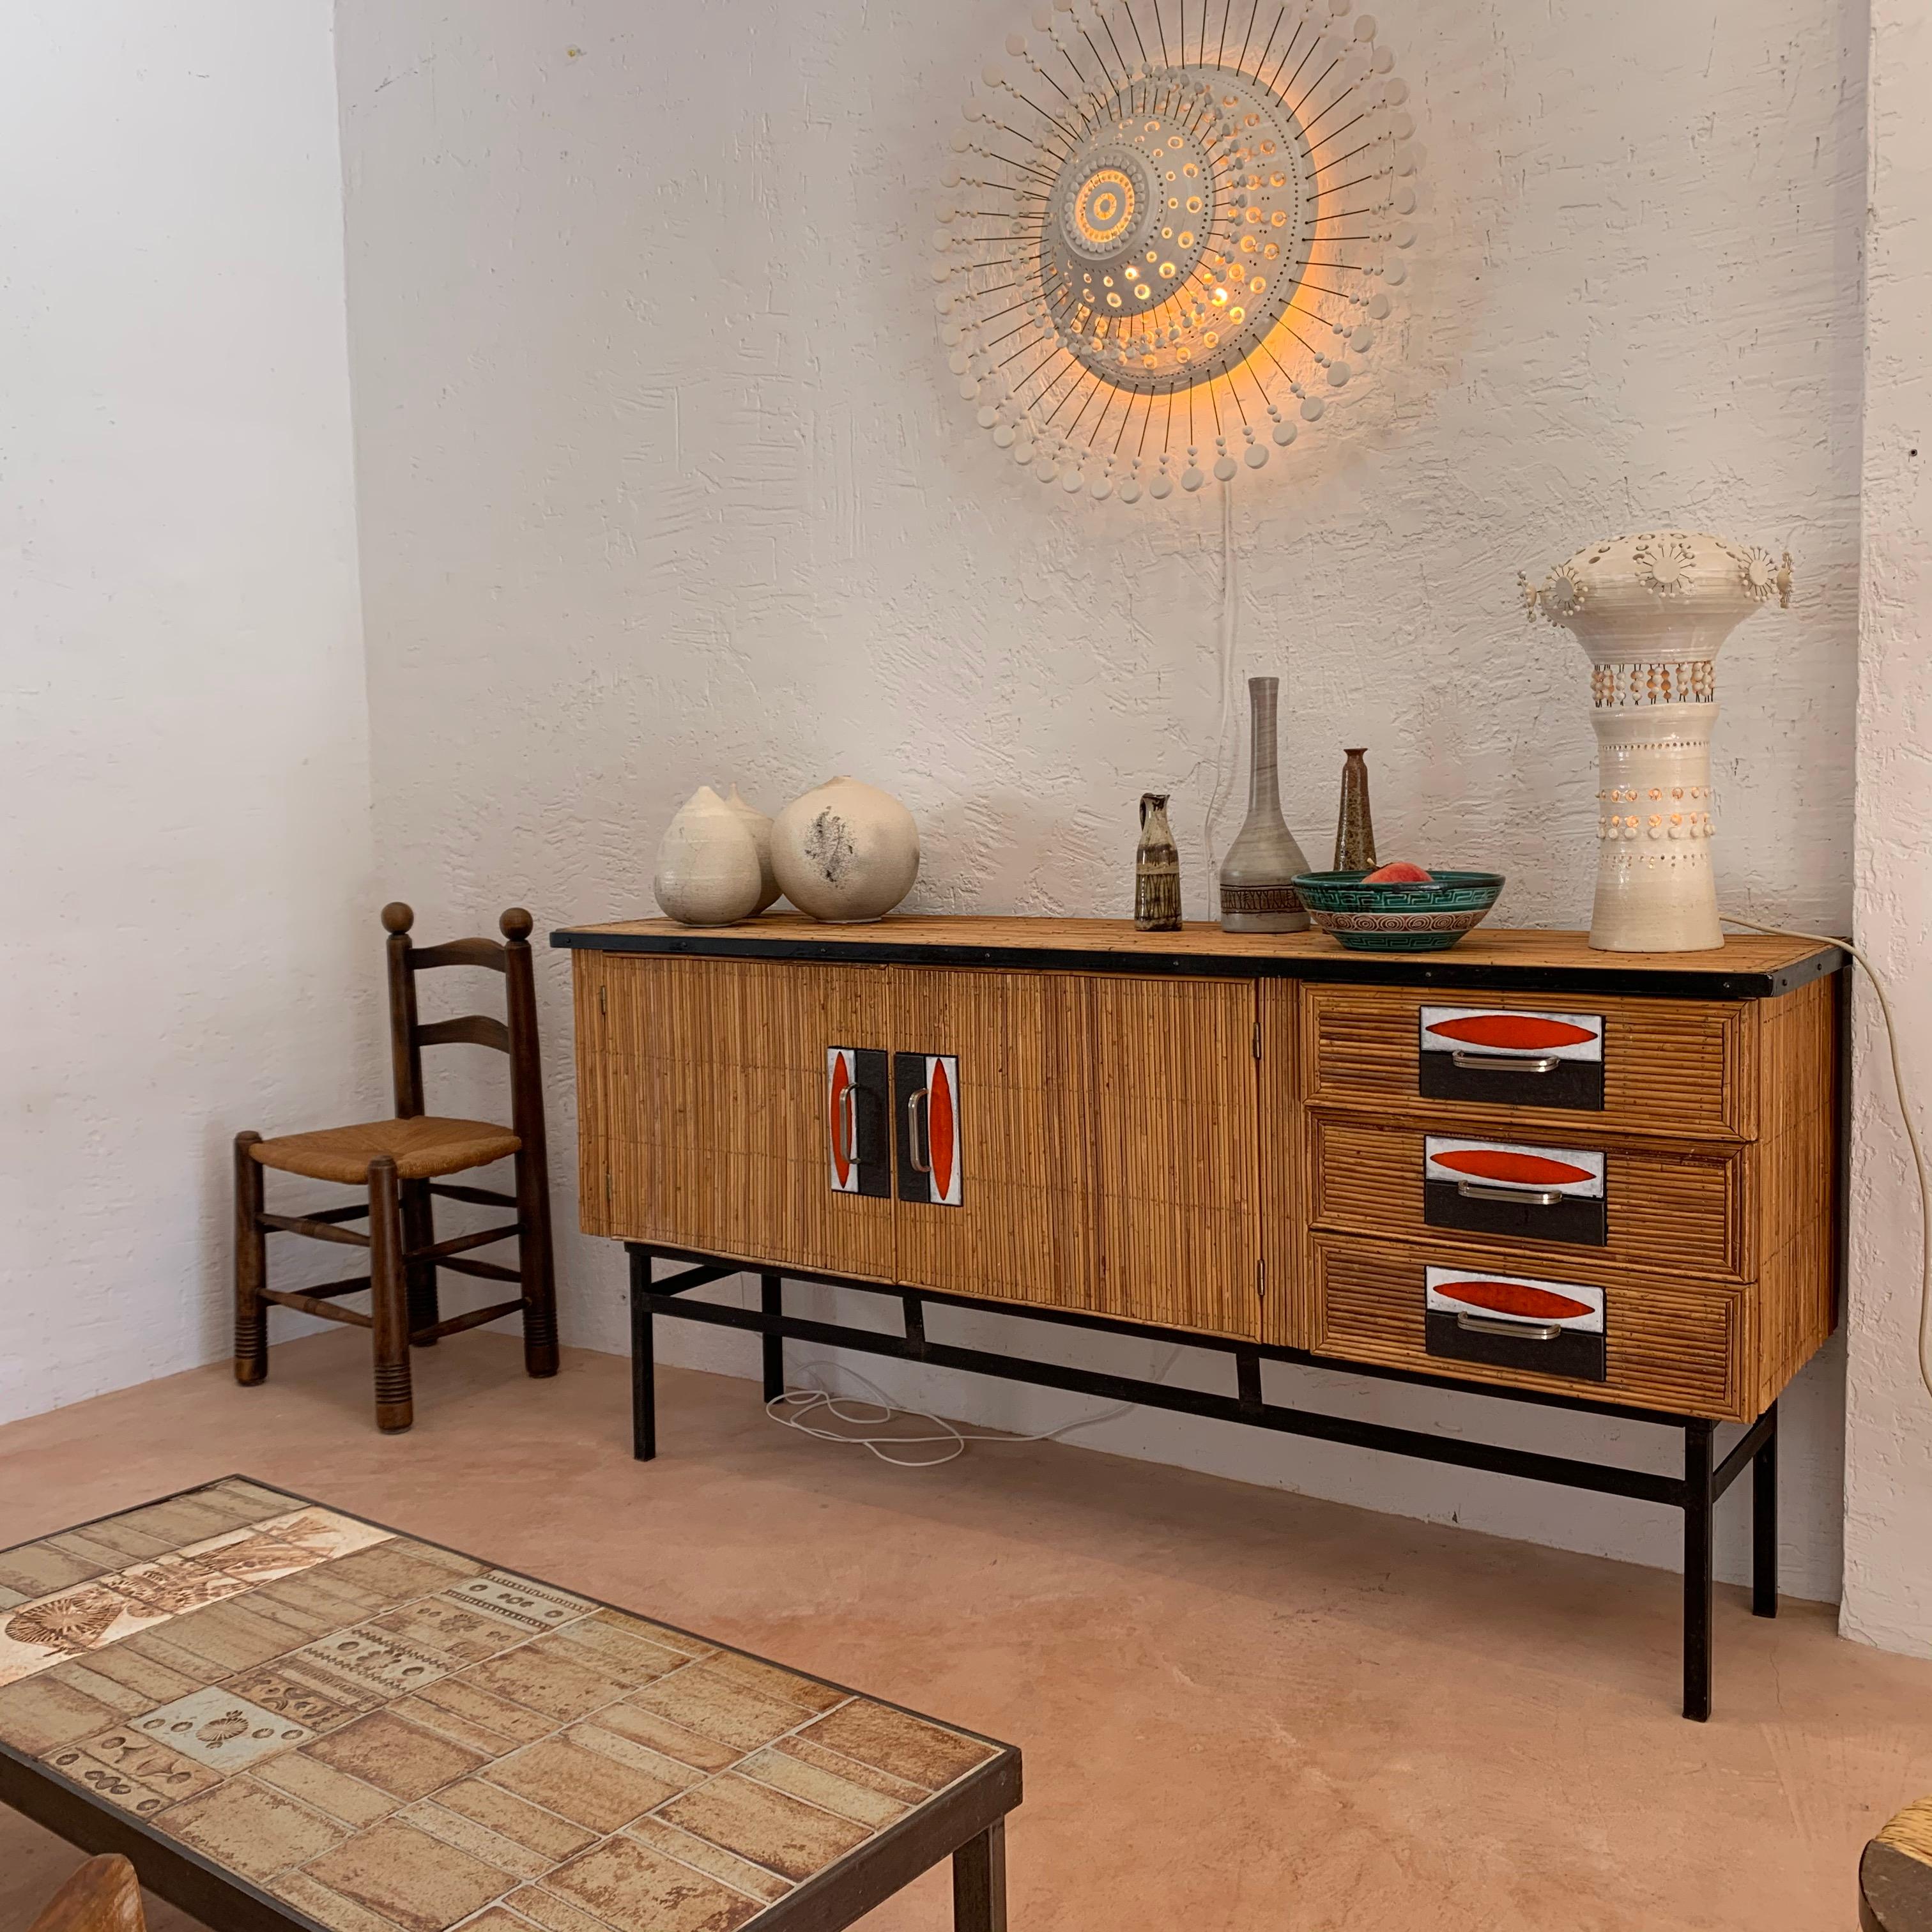 Mid-Century Modern Audoux & Minet with Roger Capron Ceramic Tiles Sideboard in Rattan & metal, 1950